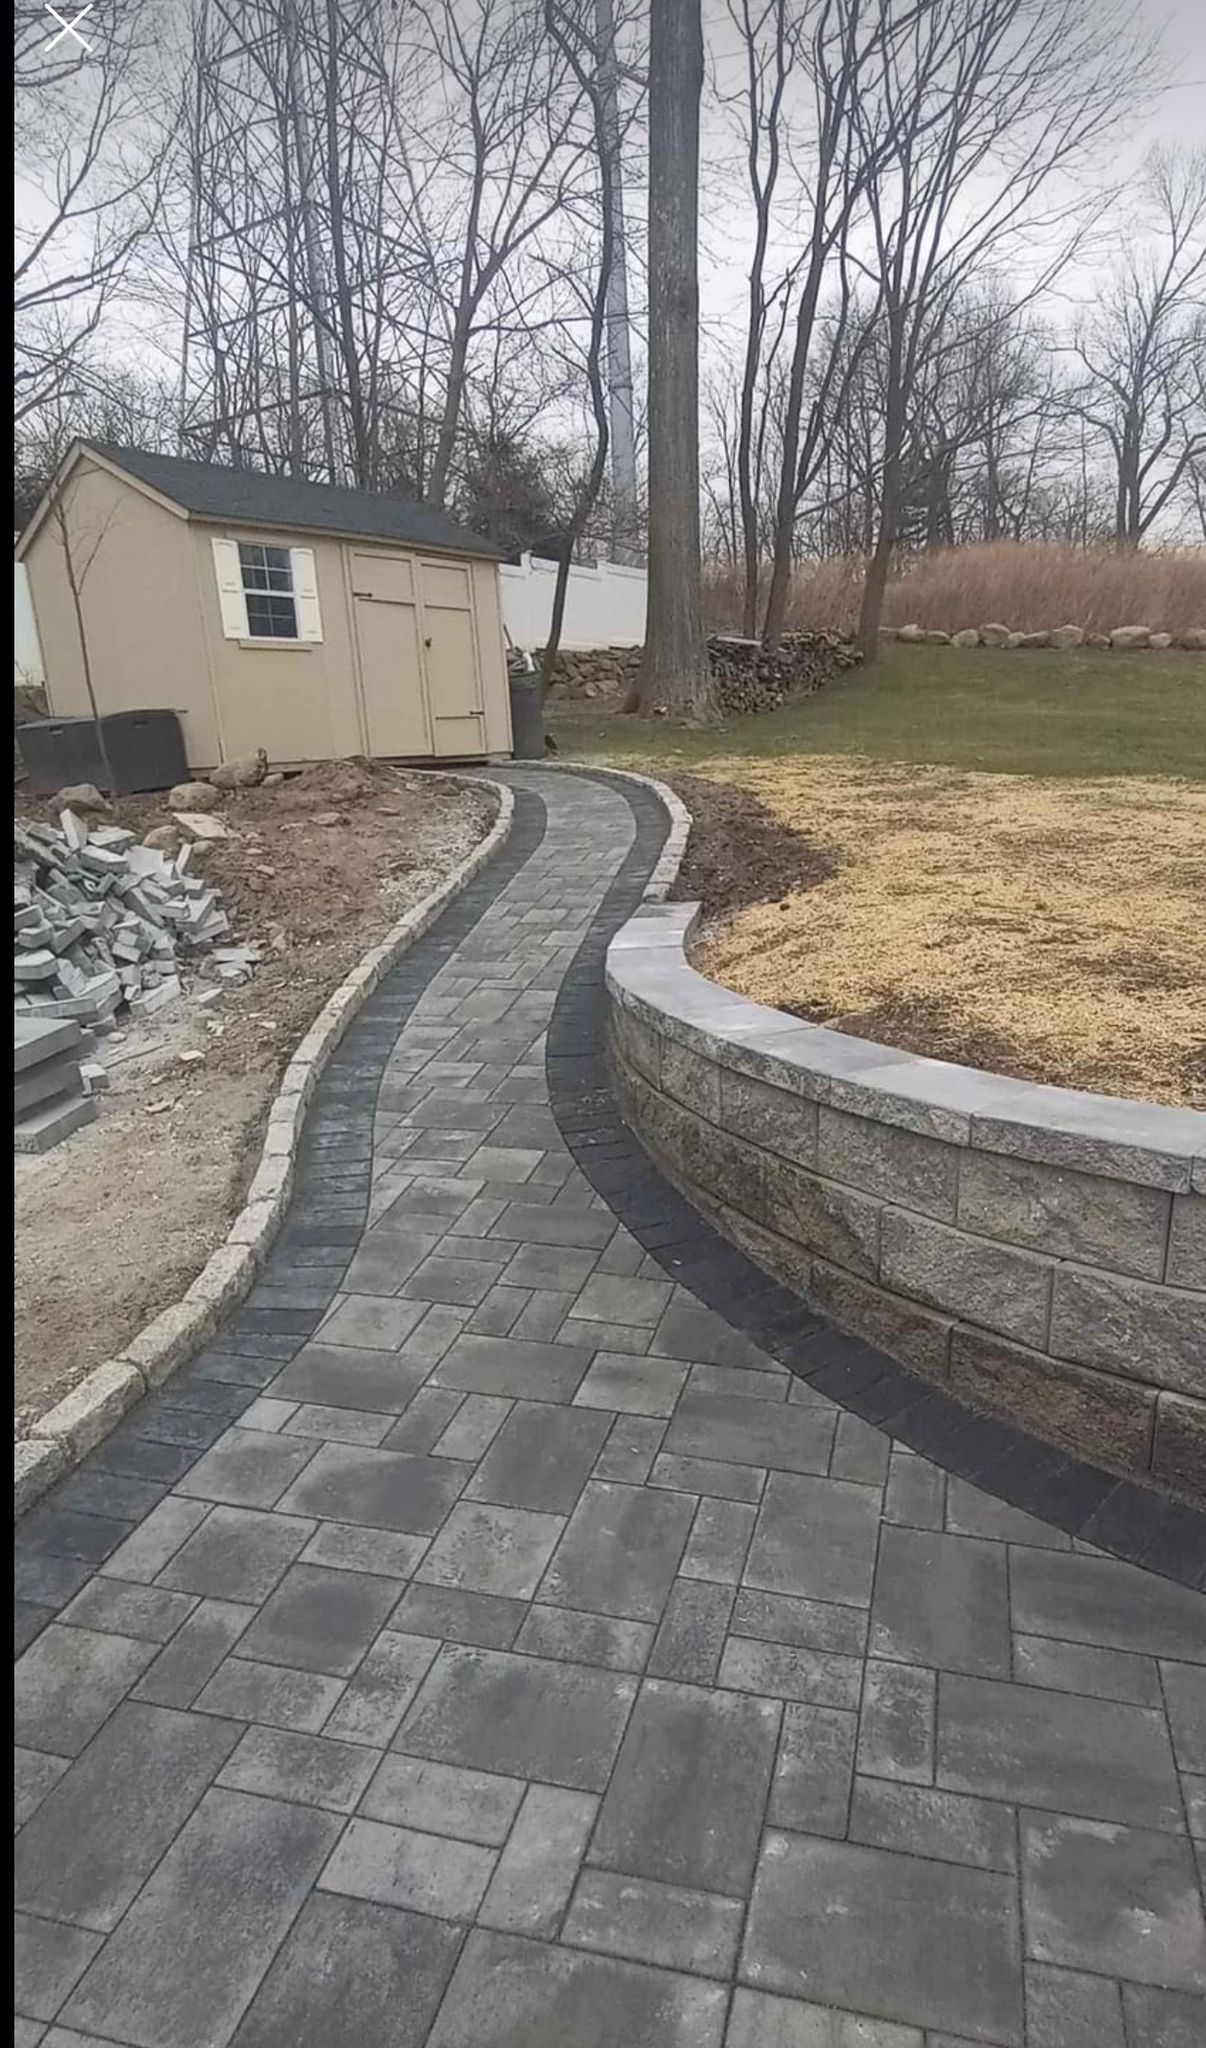 MJD Paving and Masonry Inc Projects Free On-Site Estimates | Emergency Services Available | 2-Year Warranty (203) 601-6768